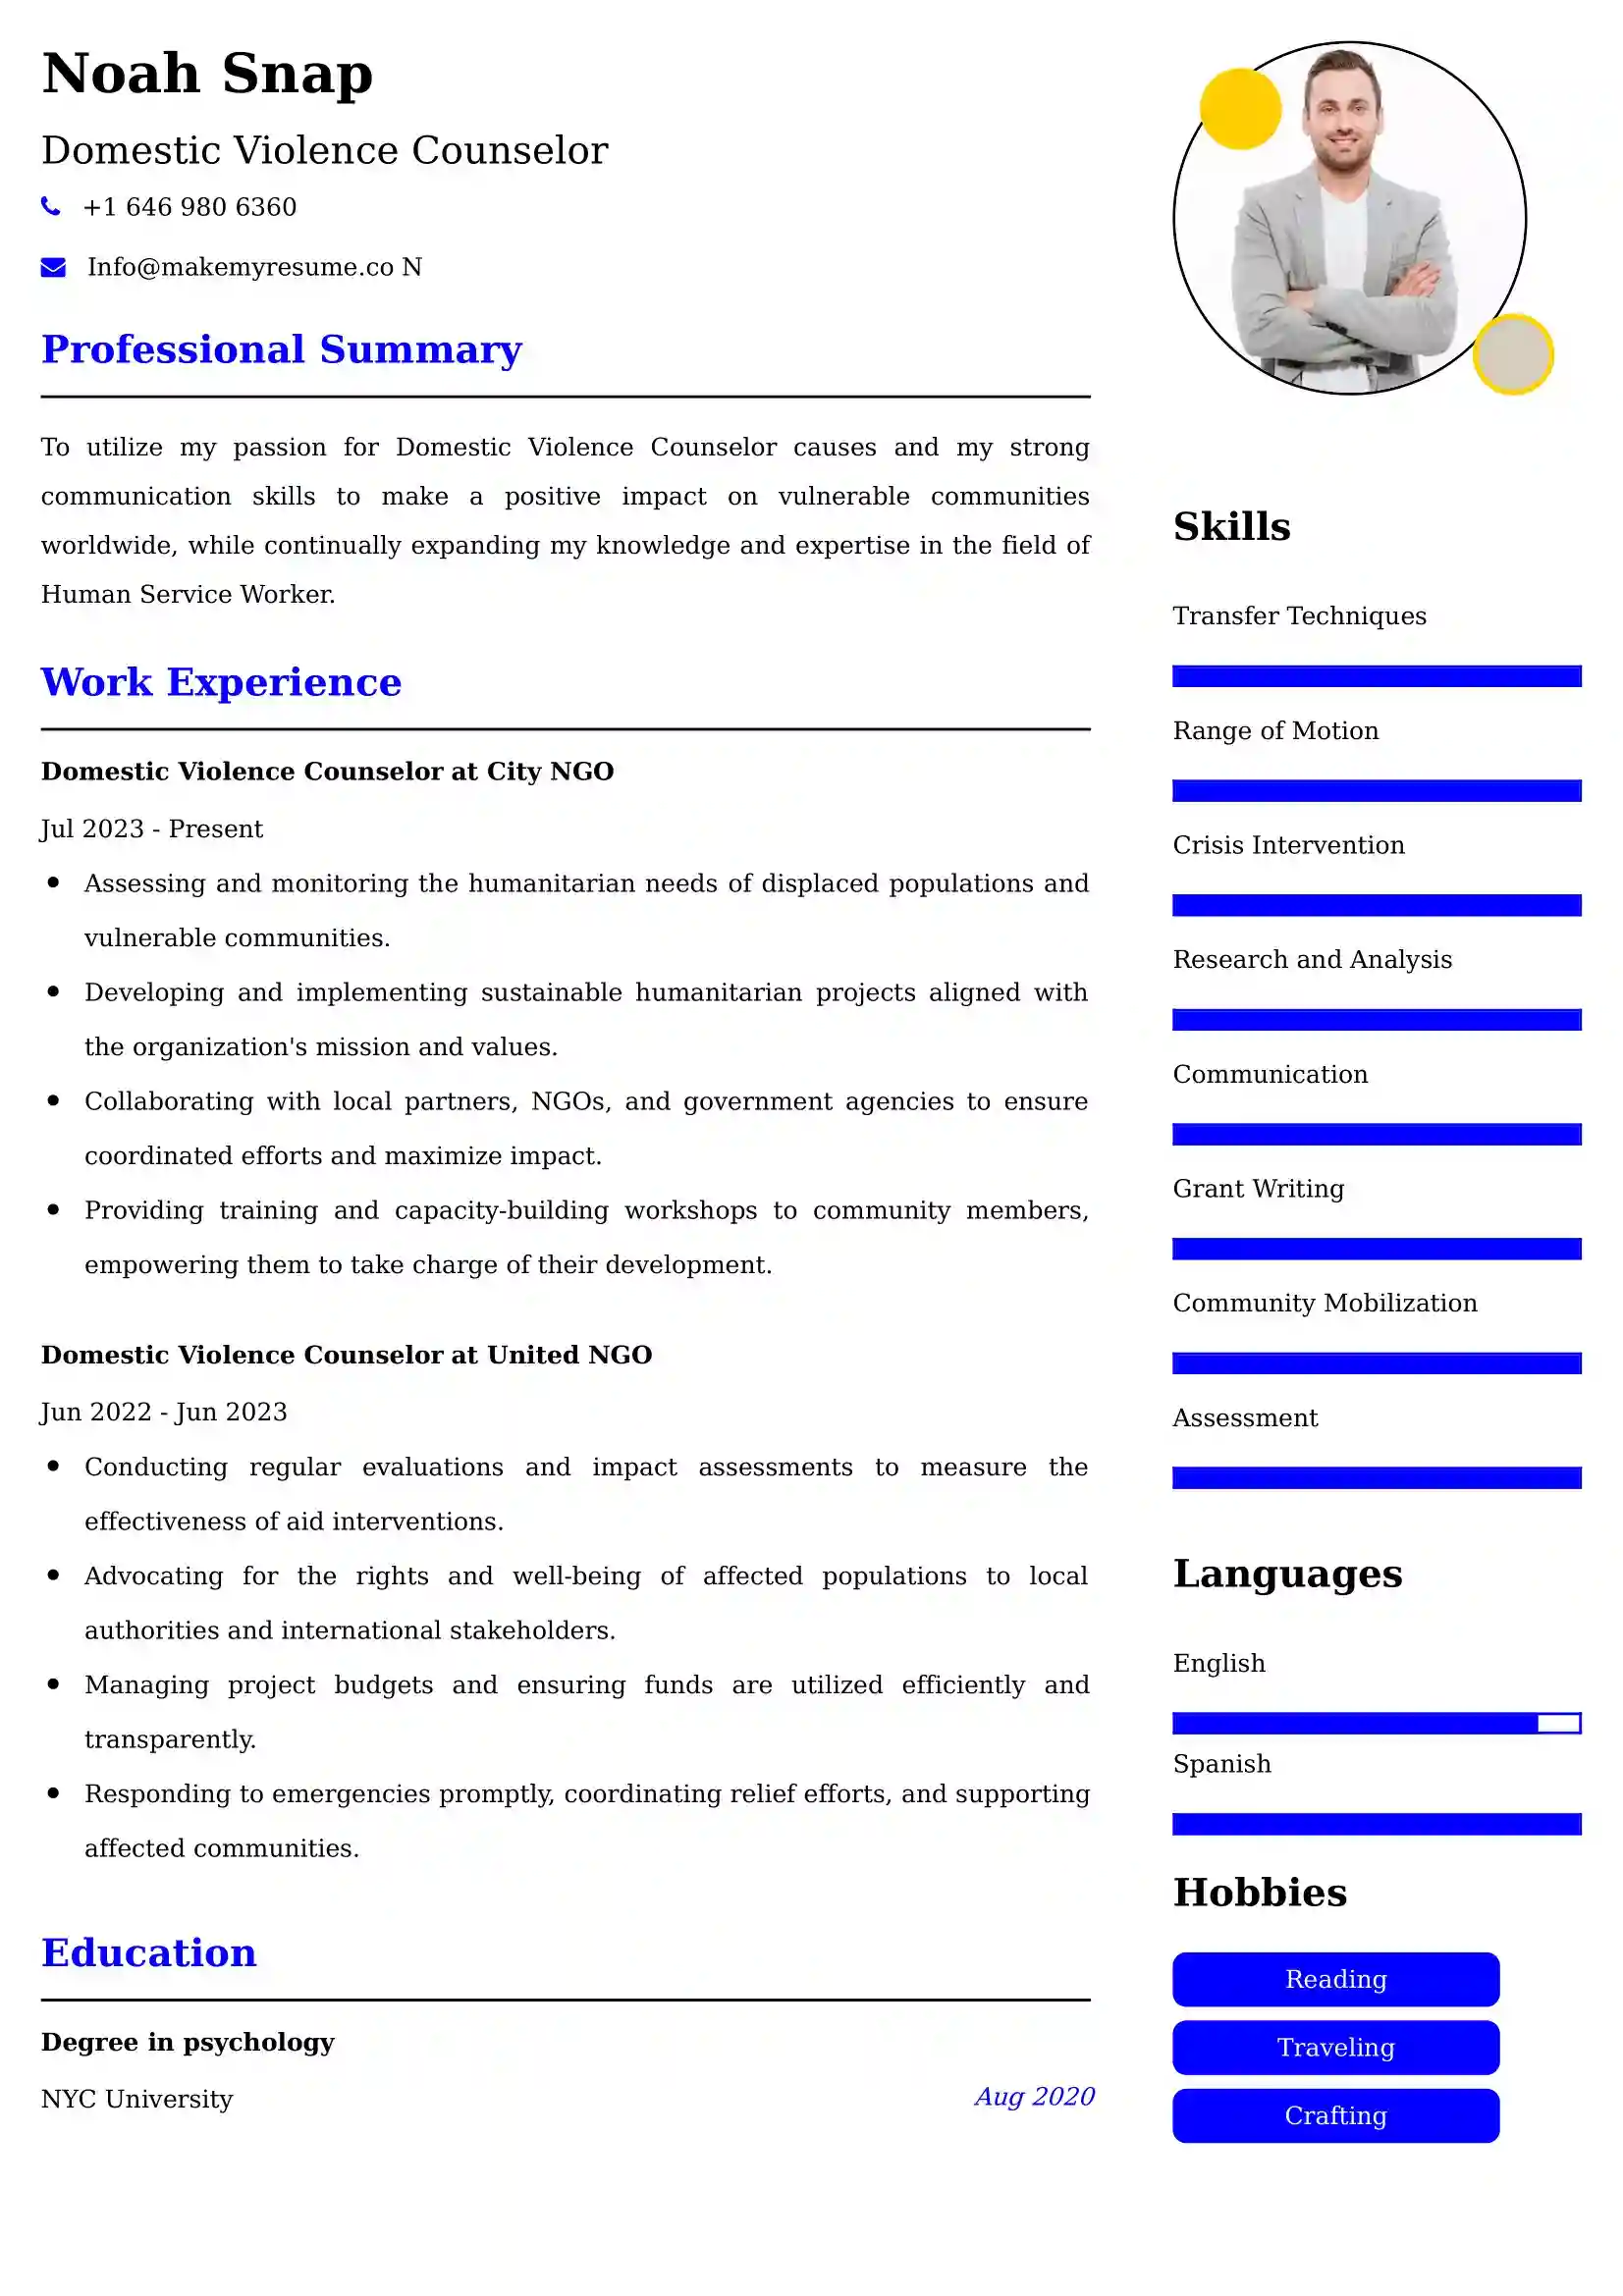 Domestic Violence Counselor CV Examples - US Format